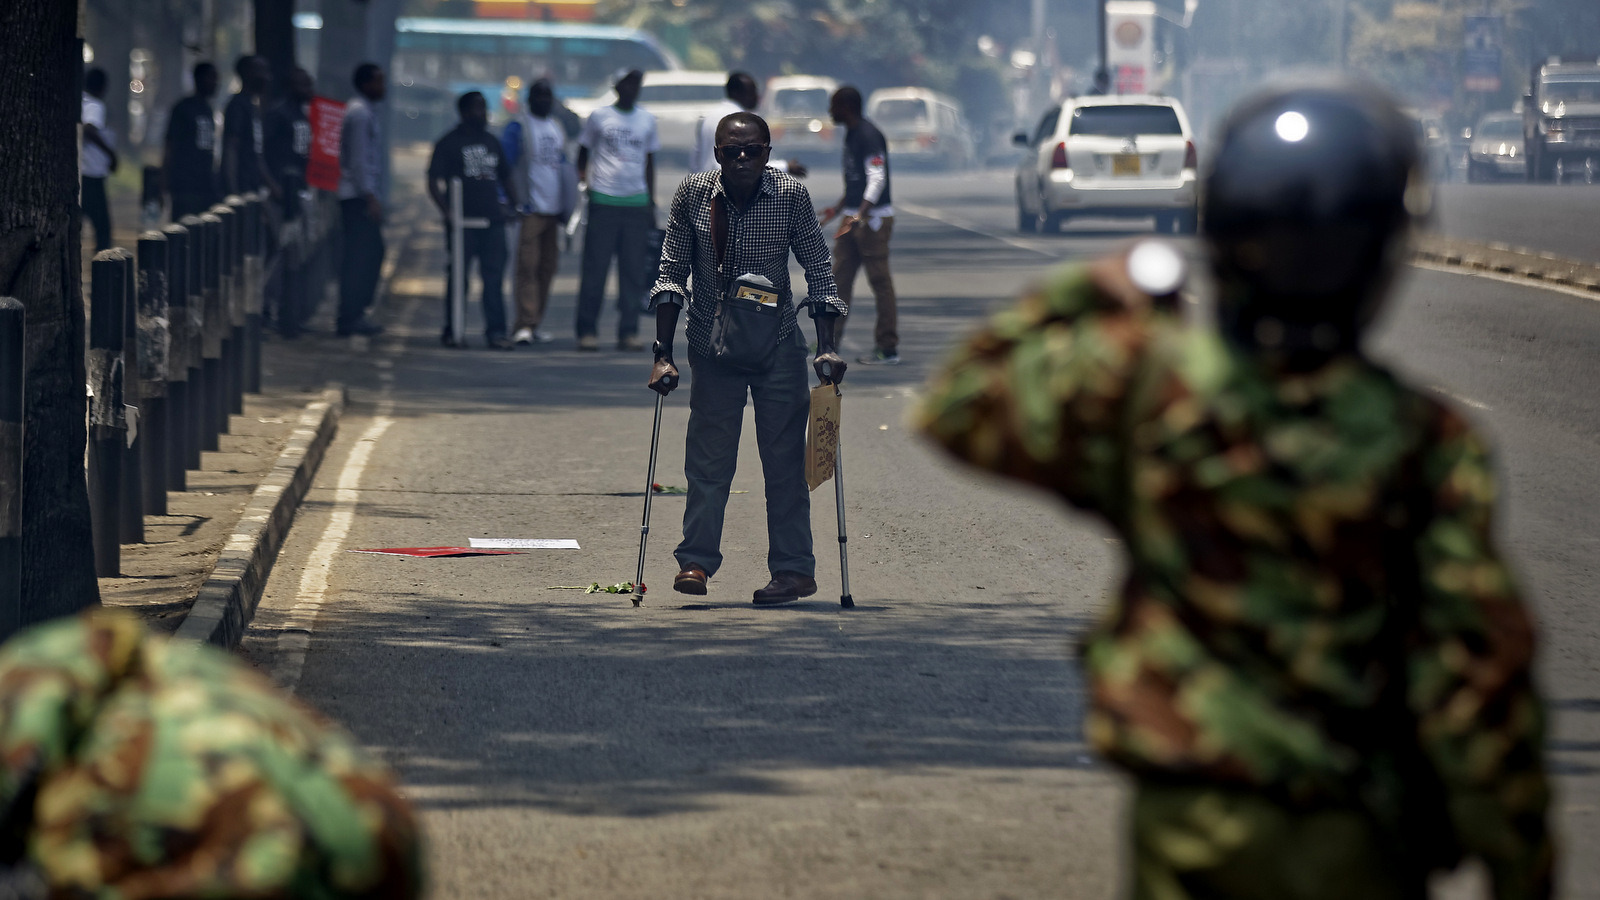 A pedestrian walking with crutches tries to flee as police fire tear gas grenades, at demonstration against police killings of protesters and opposition supporters, in downtown Nairobi, Kenya, Oct. 19, 2017. Police fired tear gas grenades and rifles in the air to disperse around 20 activists as they were still gathering in Uhuru Park, despite a court order Tuesday that removed the government's ban on demonstrations. (AP/Ben Curtis)